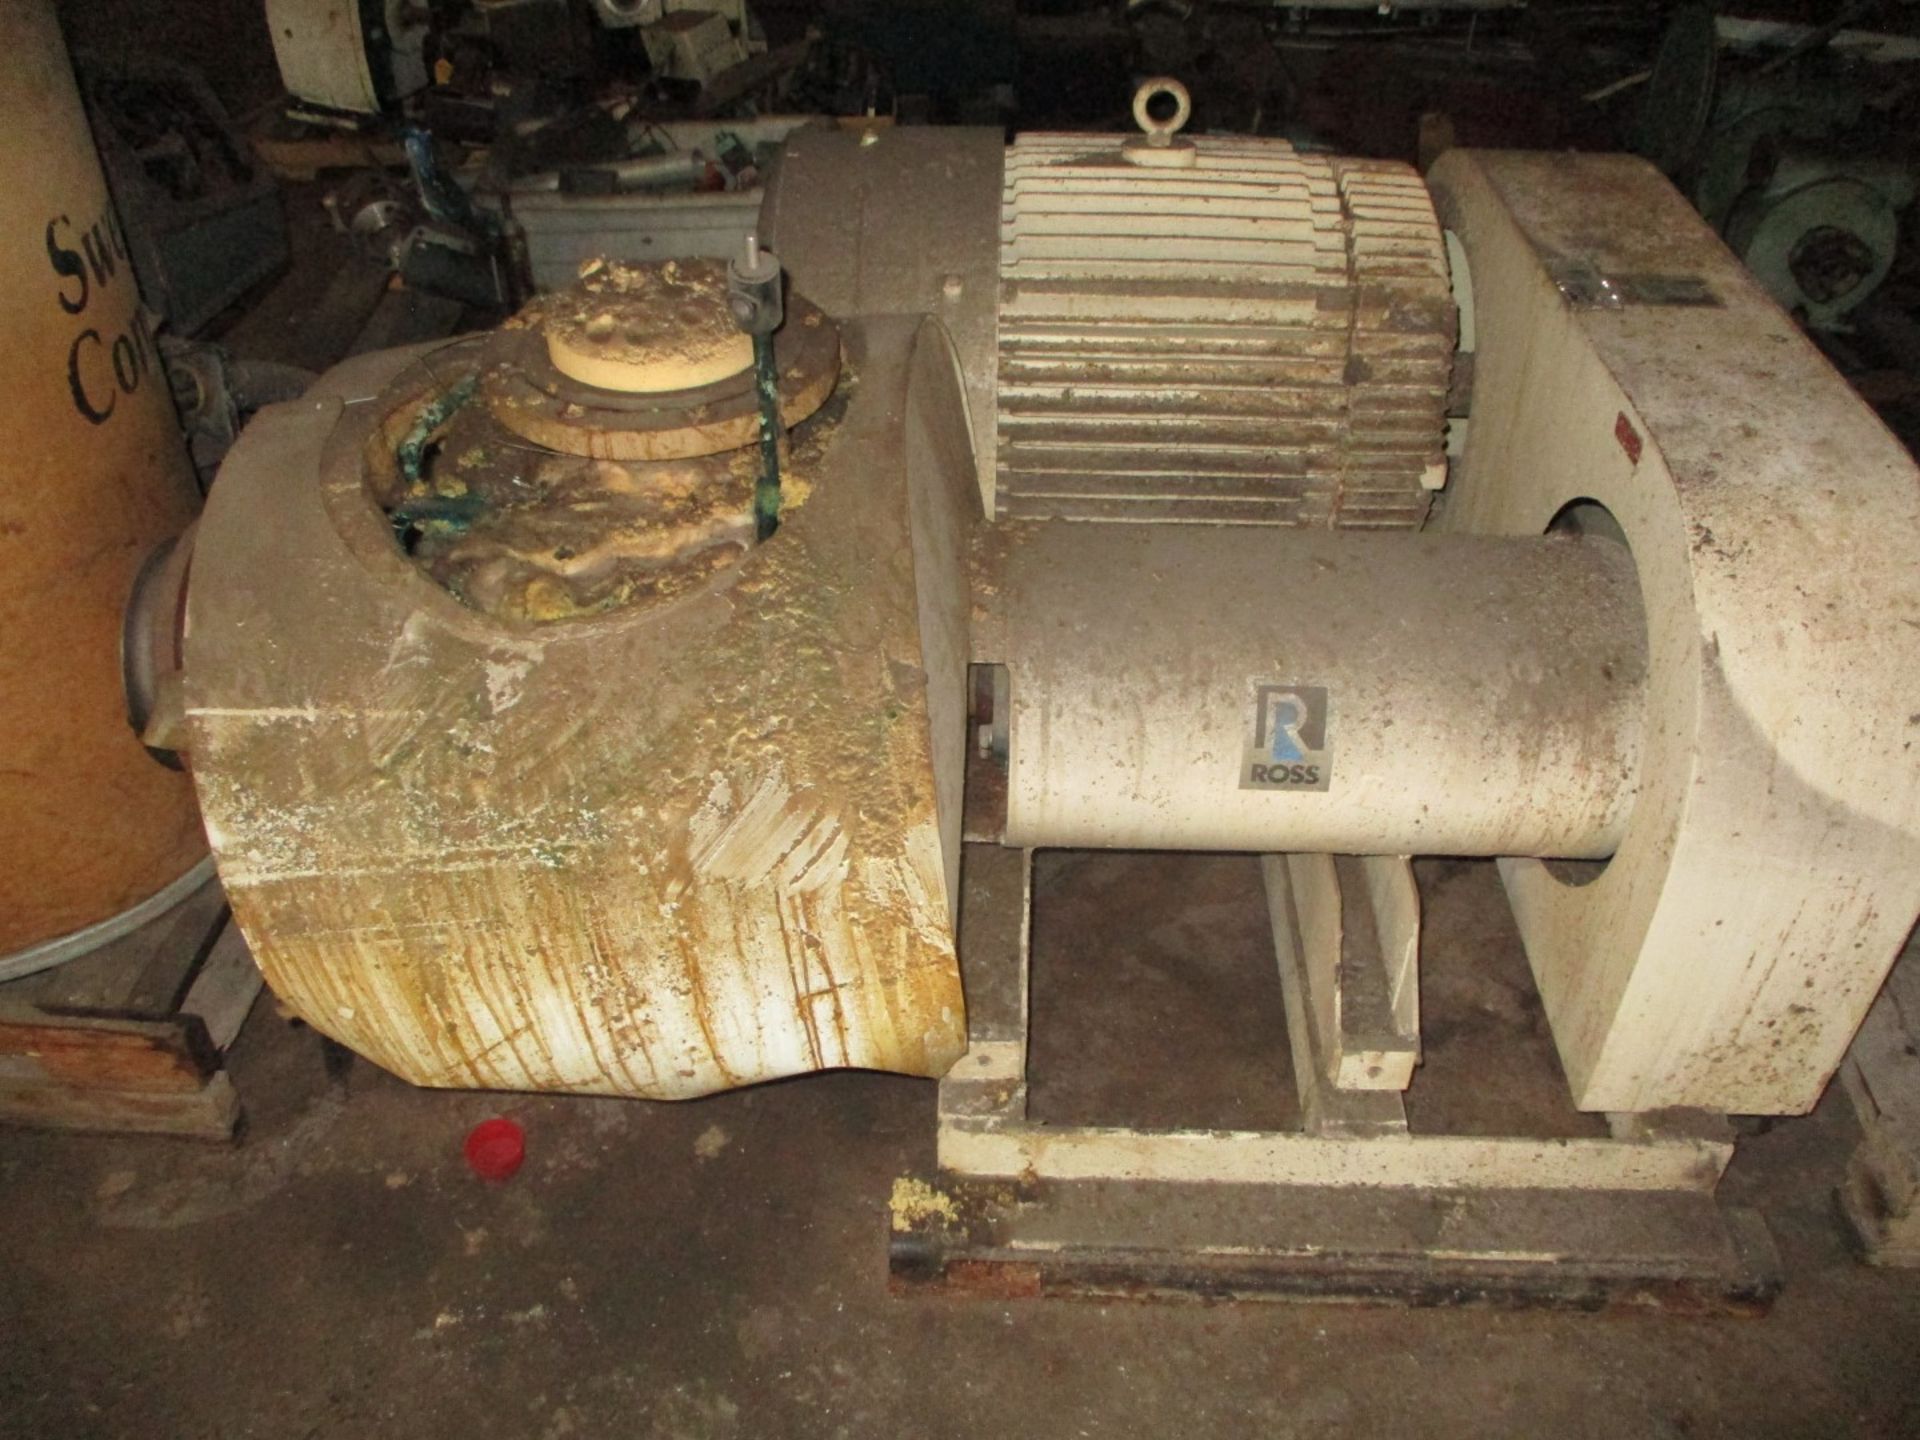 Ross Inline High Shear Mixer, Model Me4100, Stainless Steel Construction, Approxima | Rig Fee $1500 - Image 3 of 4